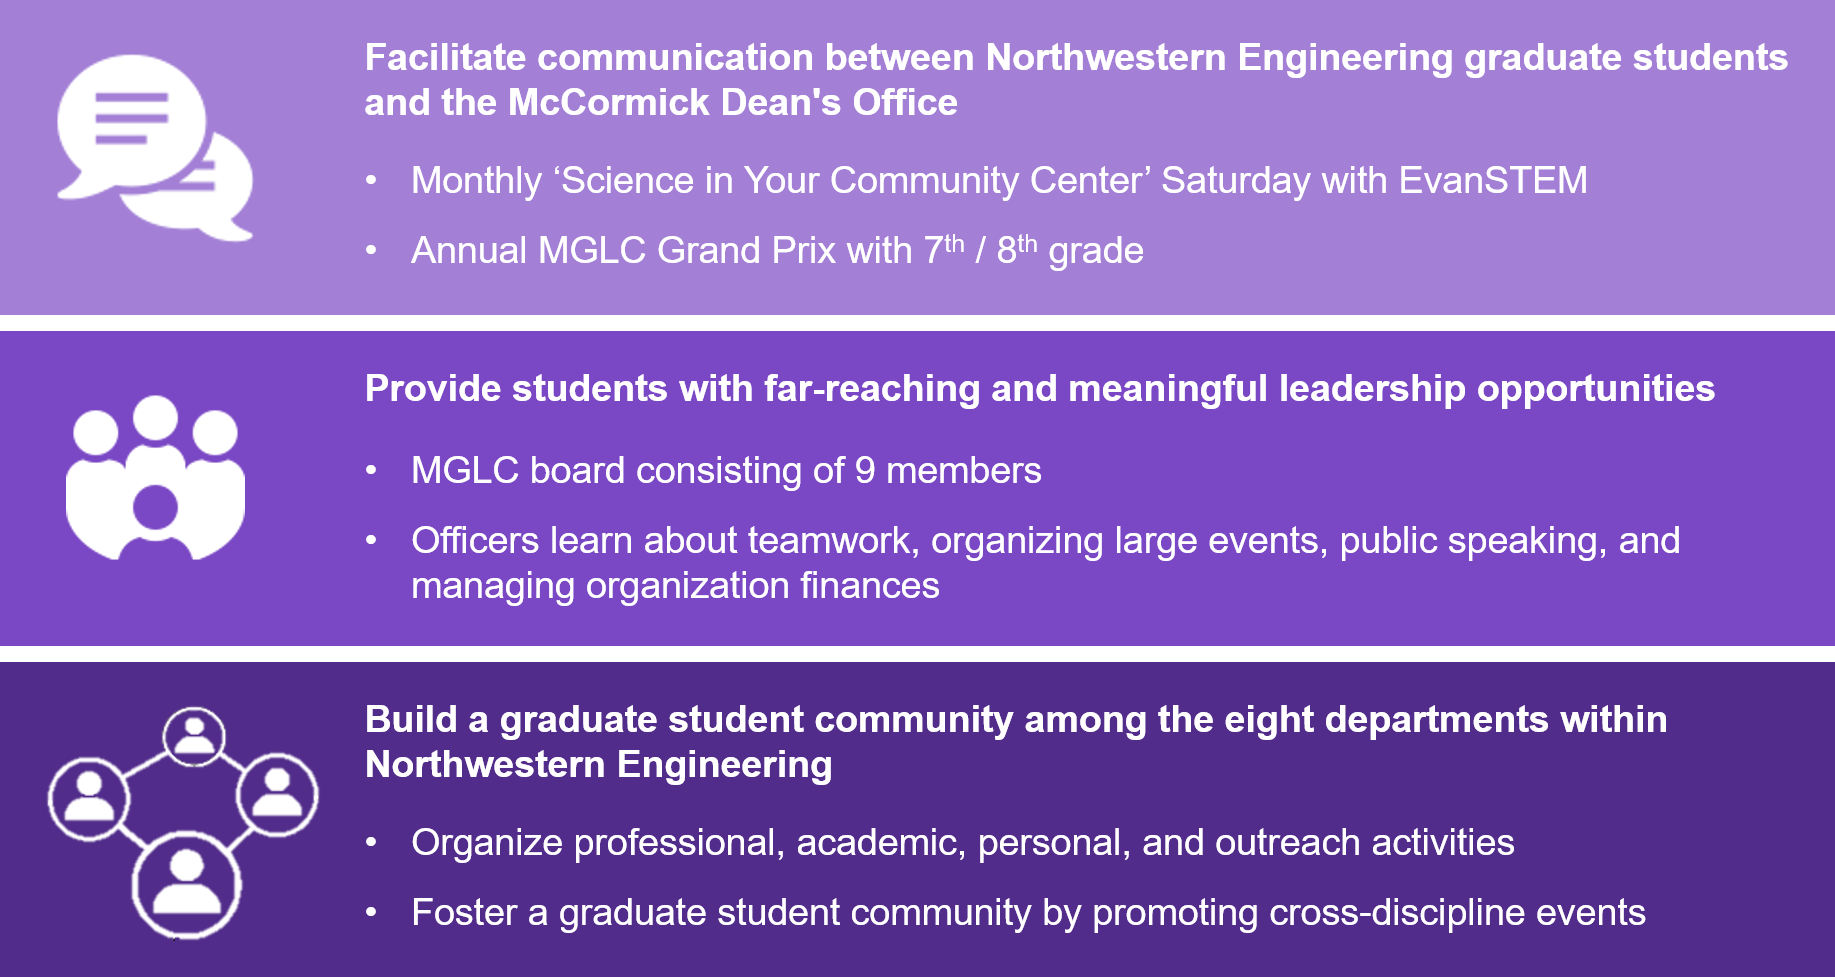 MGLC mission: Facilitate communication between Northwestern Engineering graduate students and the McCormick Dean's Office; provide students with far-reaching and meaningful leadership opportunities; build a graduate student community among the eight departments within Northwestern Engineering.